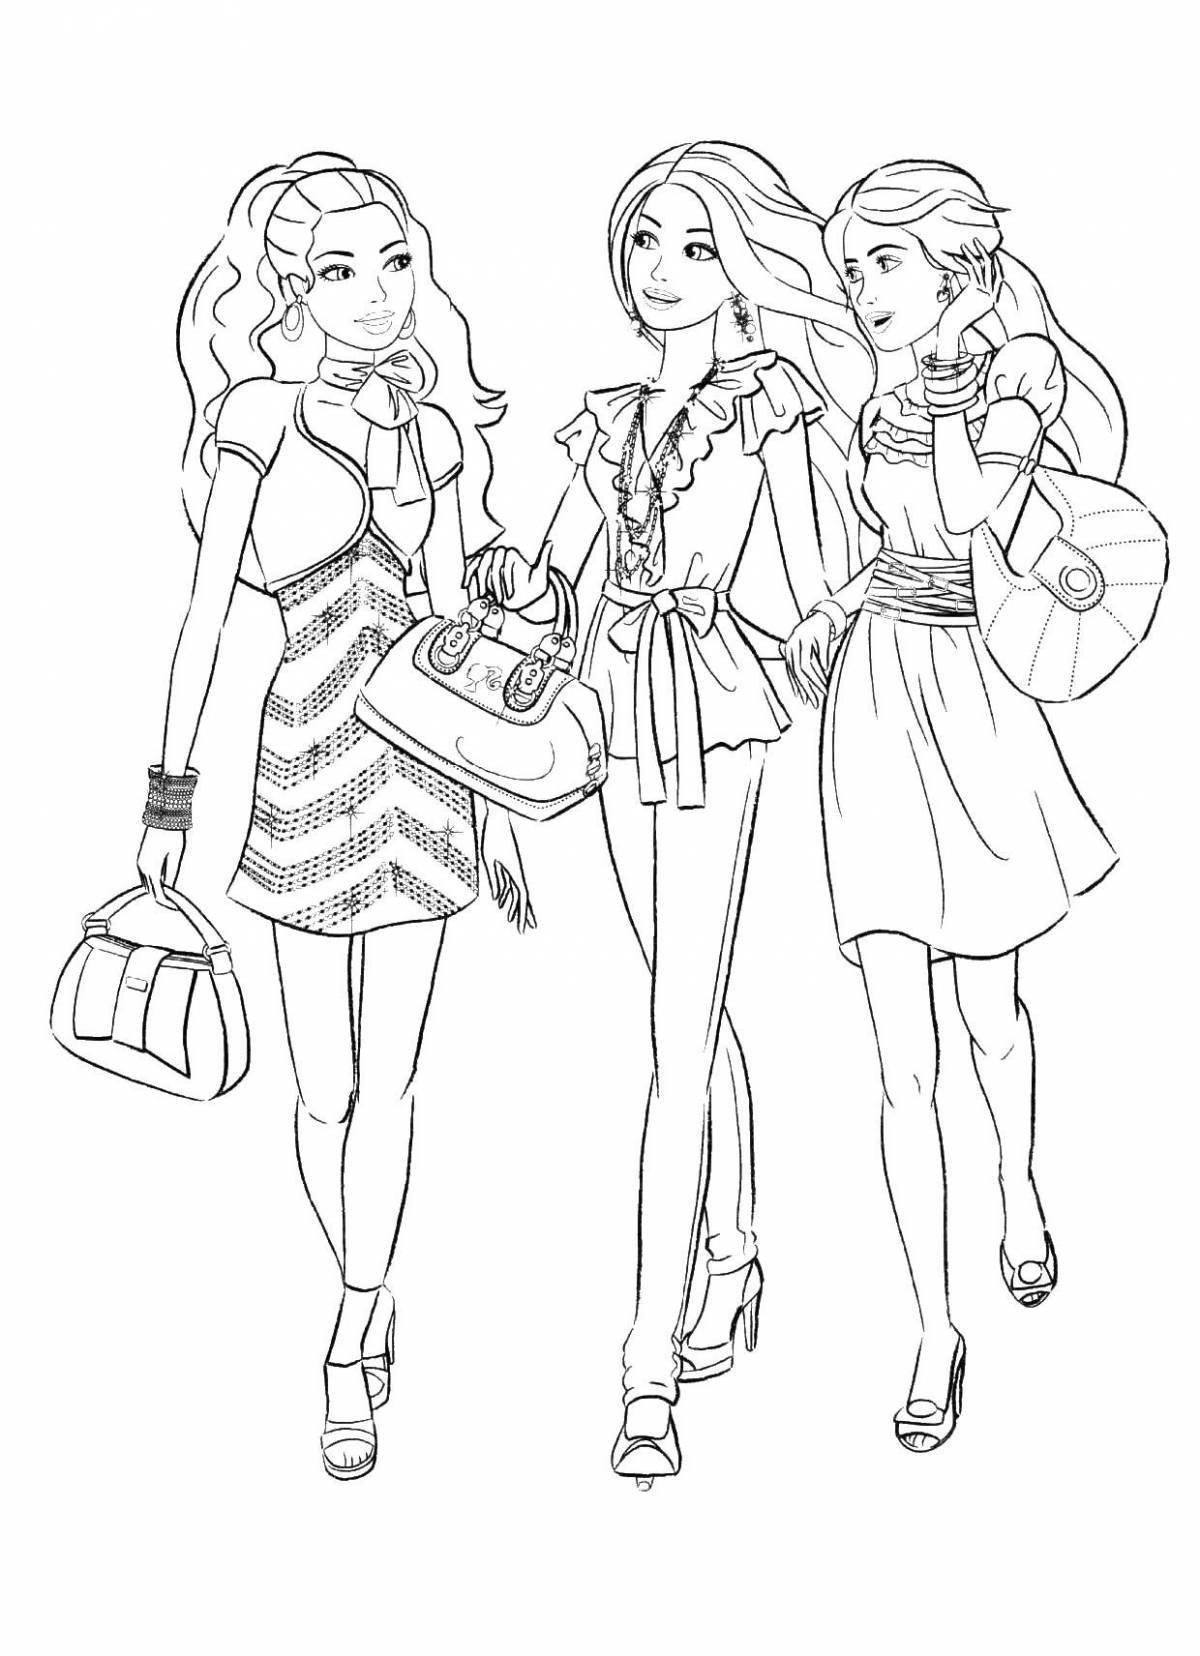 Adorable fashion girls coloring pages